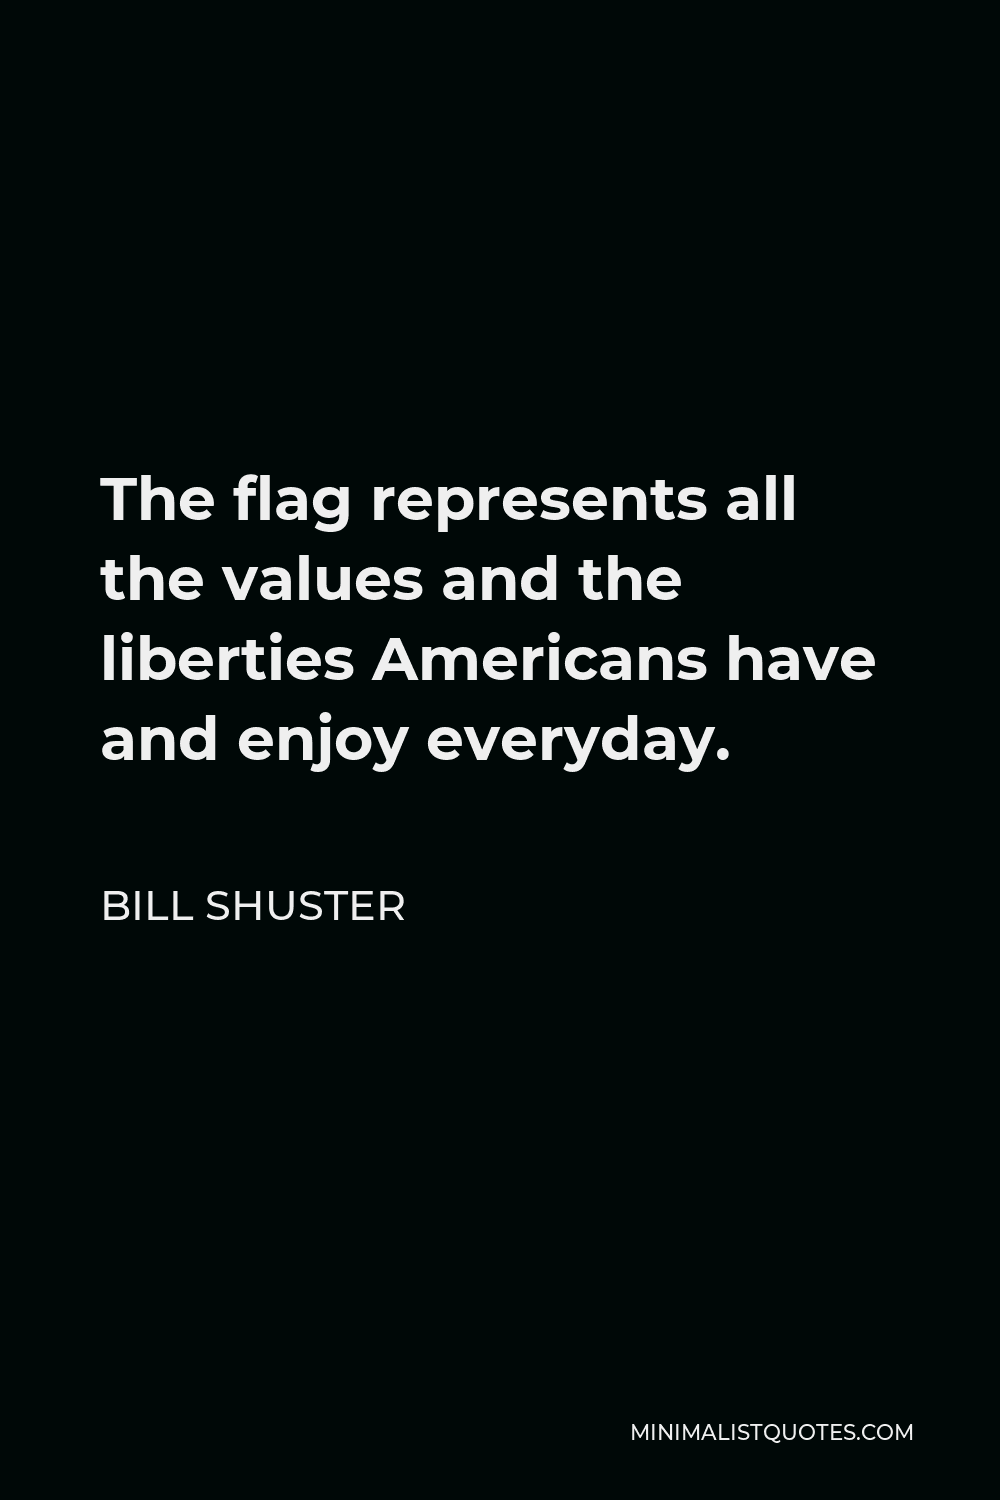 Bill Shuster Quote - The flag represents all the values and the liberties Americans have and enjoy everyday.